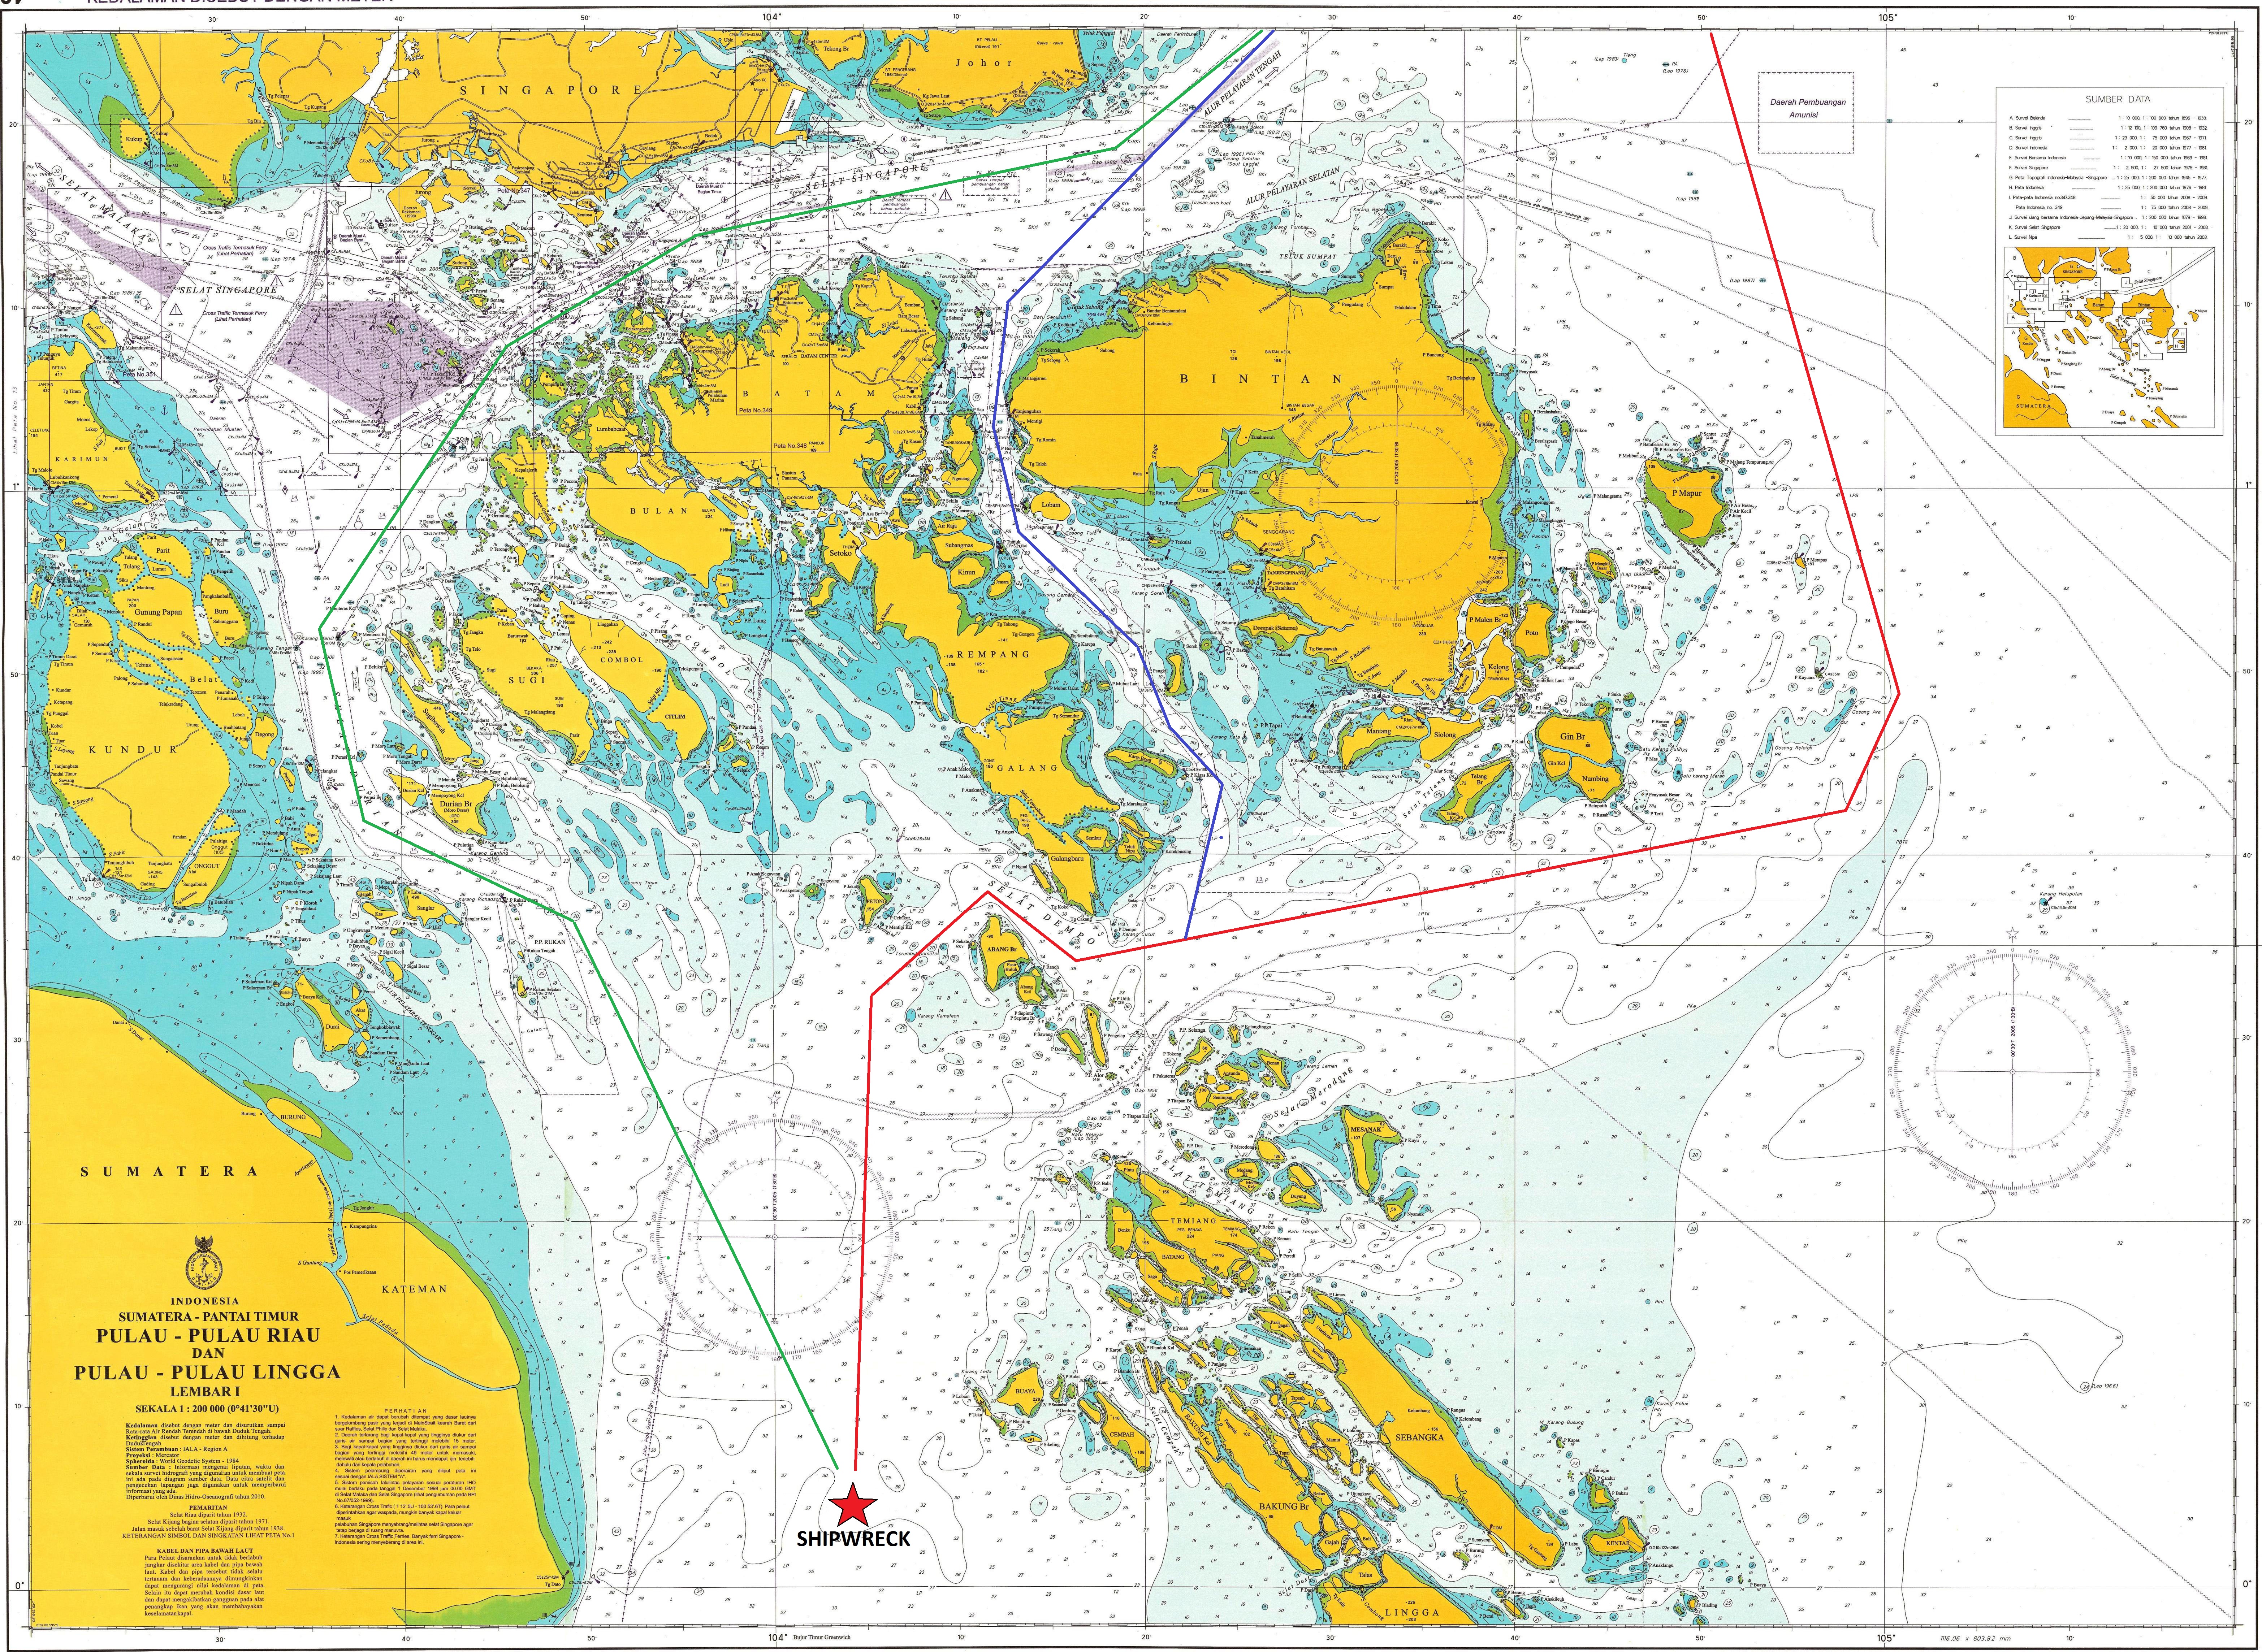 Three possible routes through the Riau Archipelago to the Lingga Wreck location.